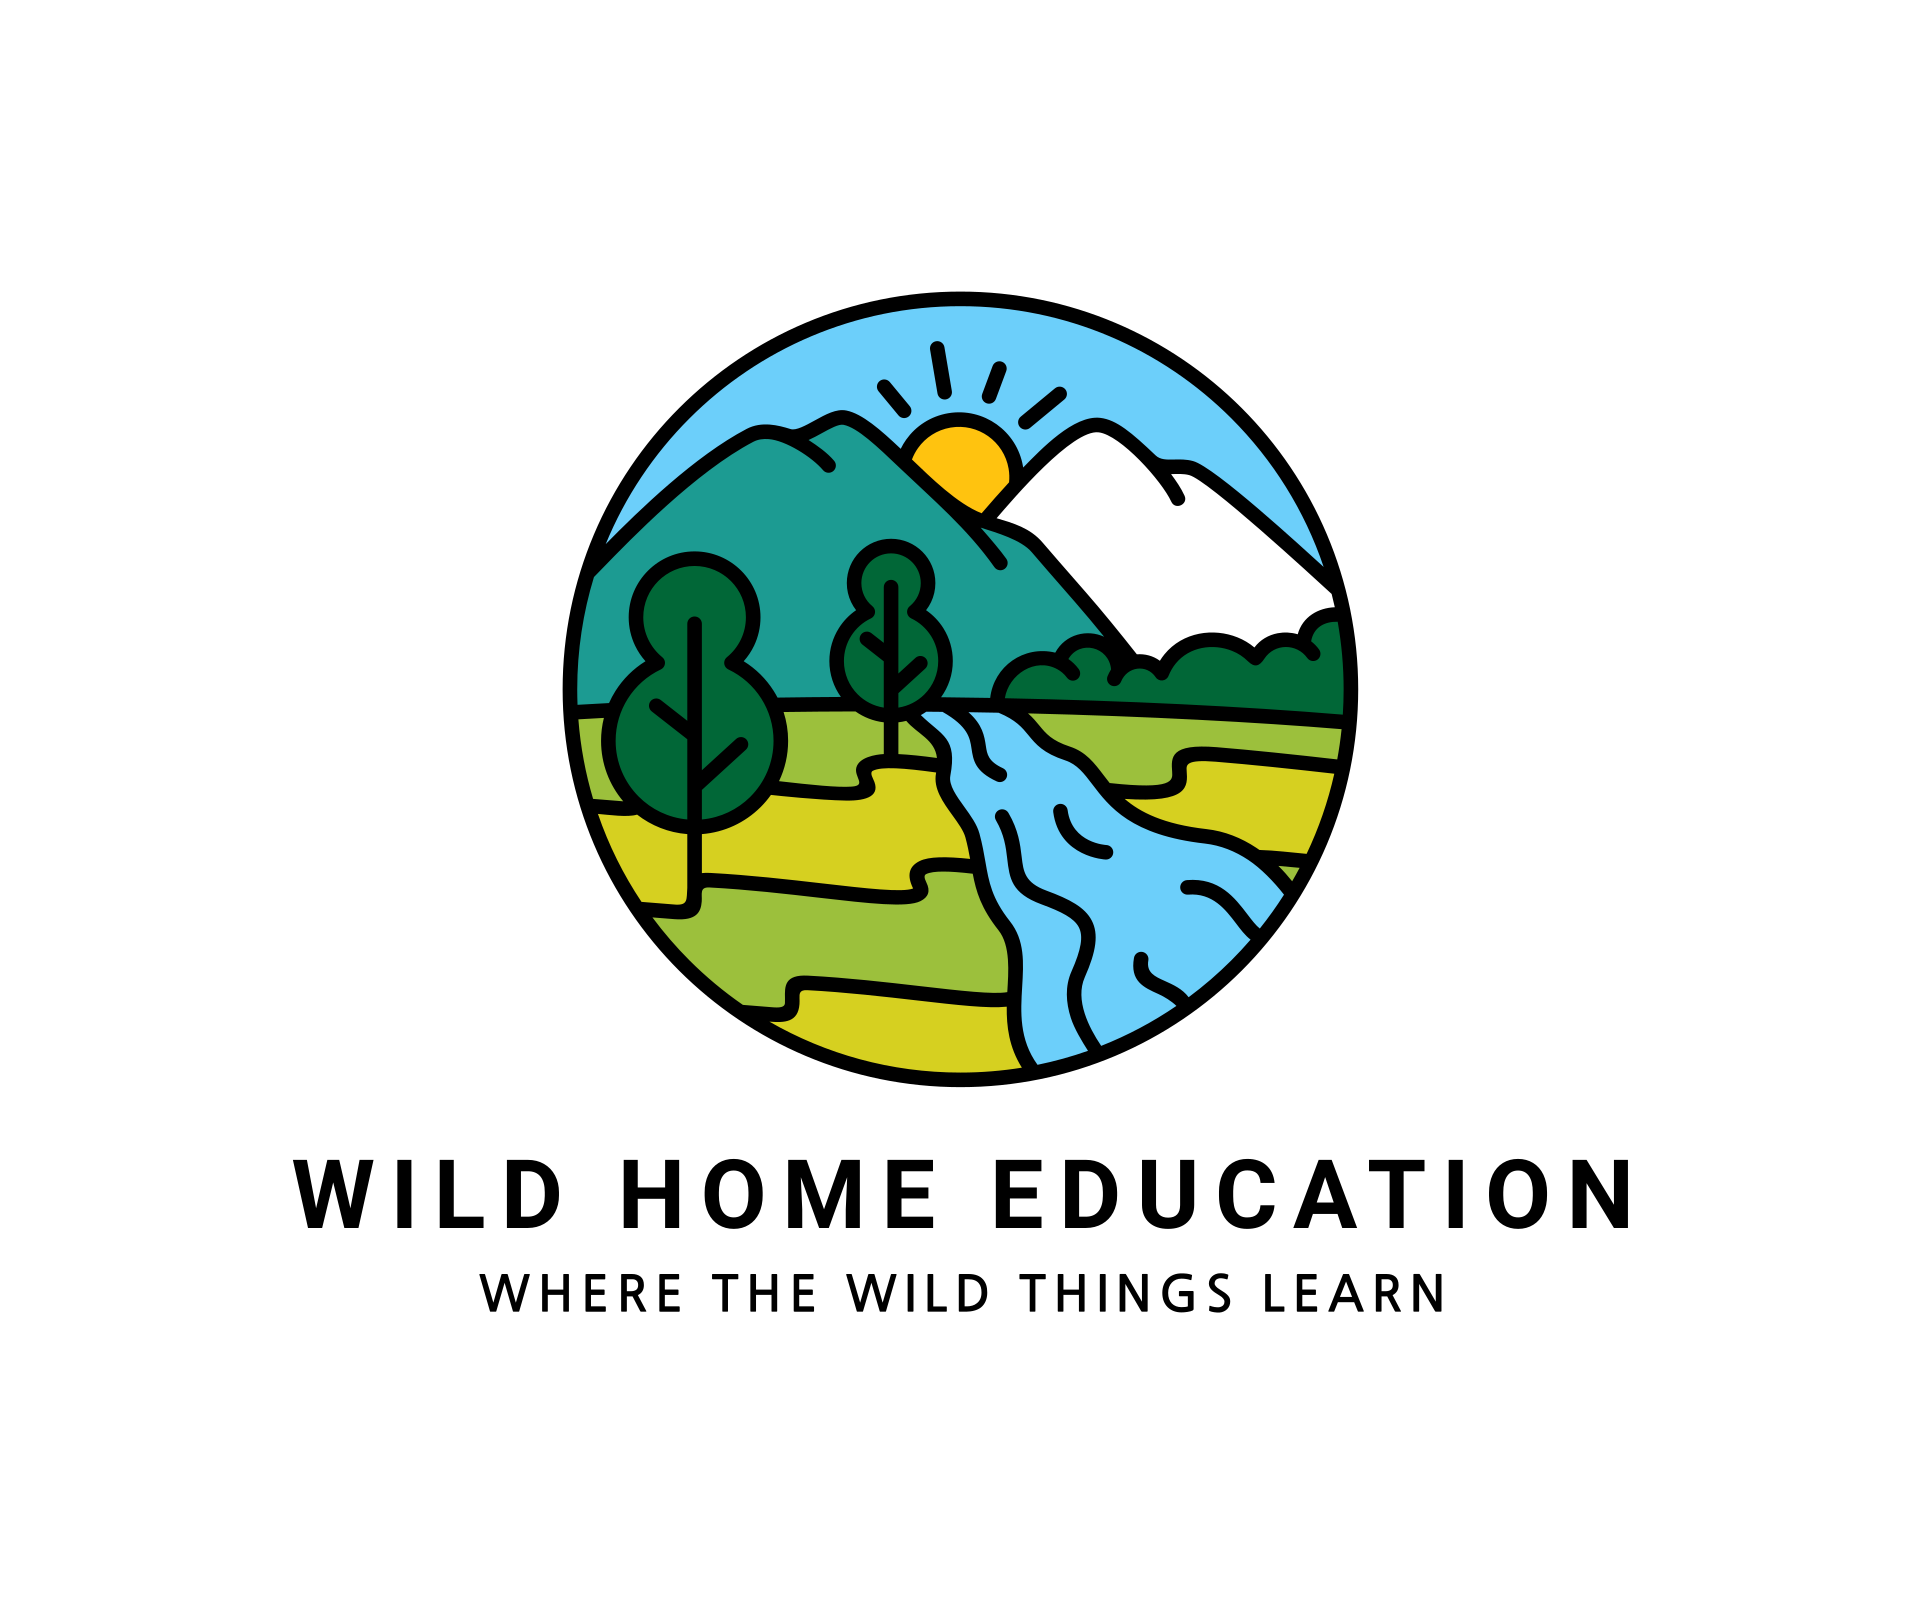 WILD HOME EDUCATION